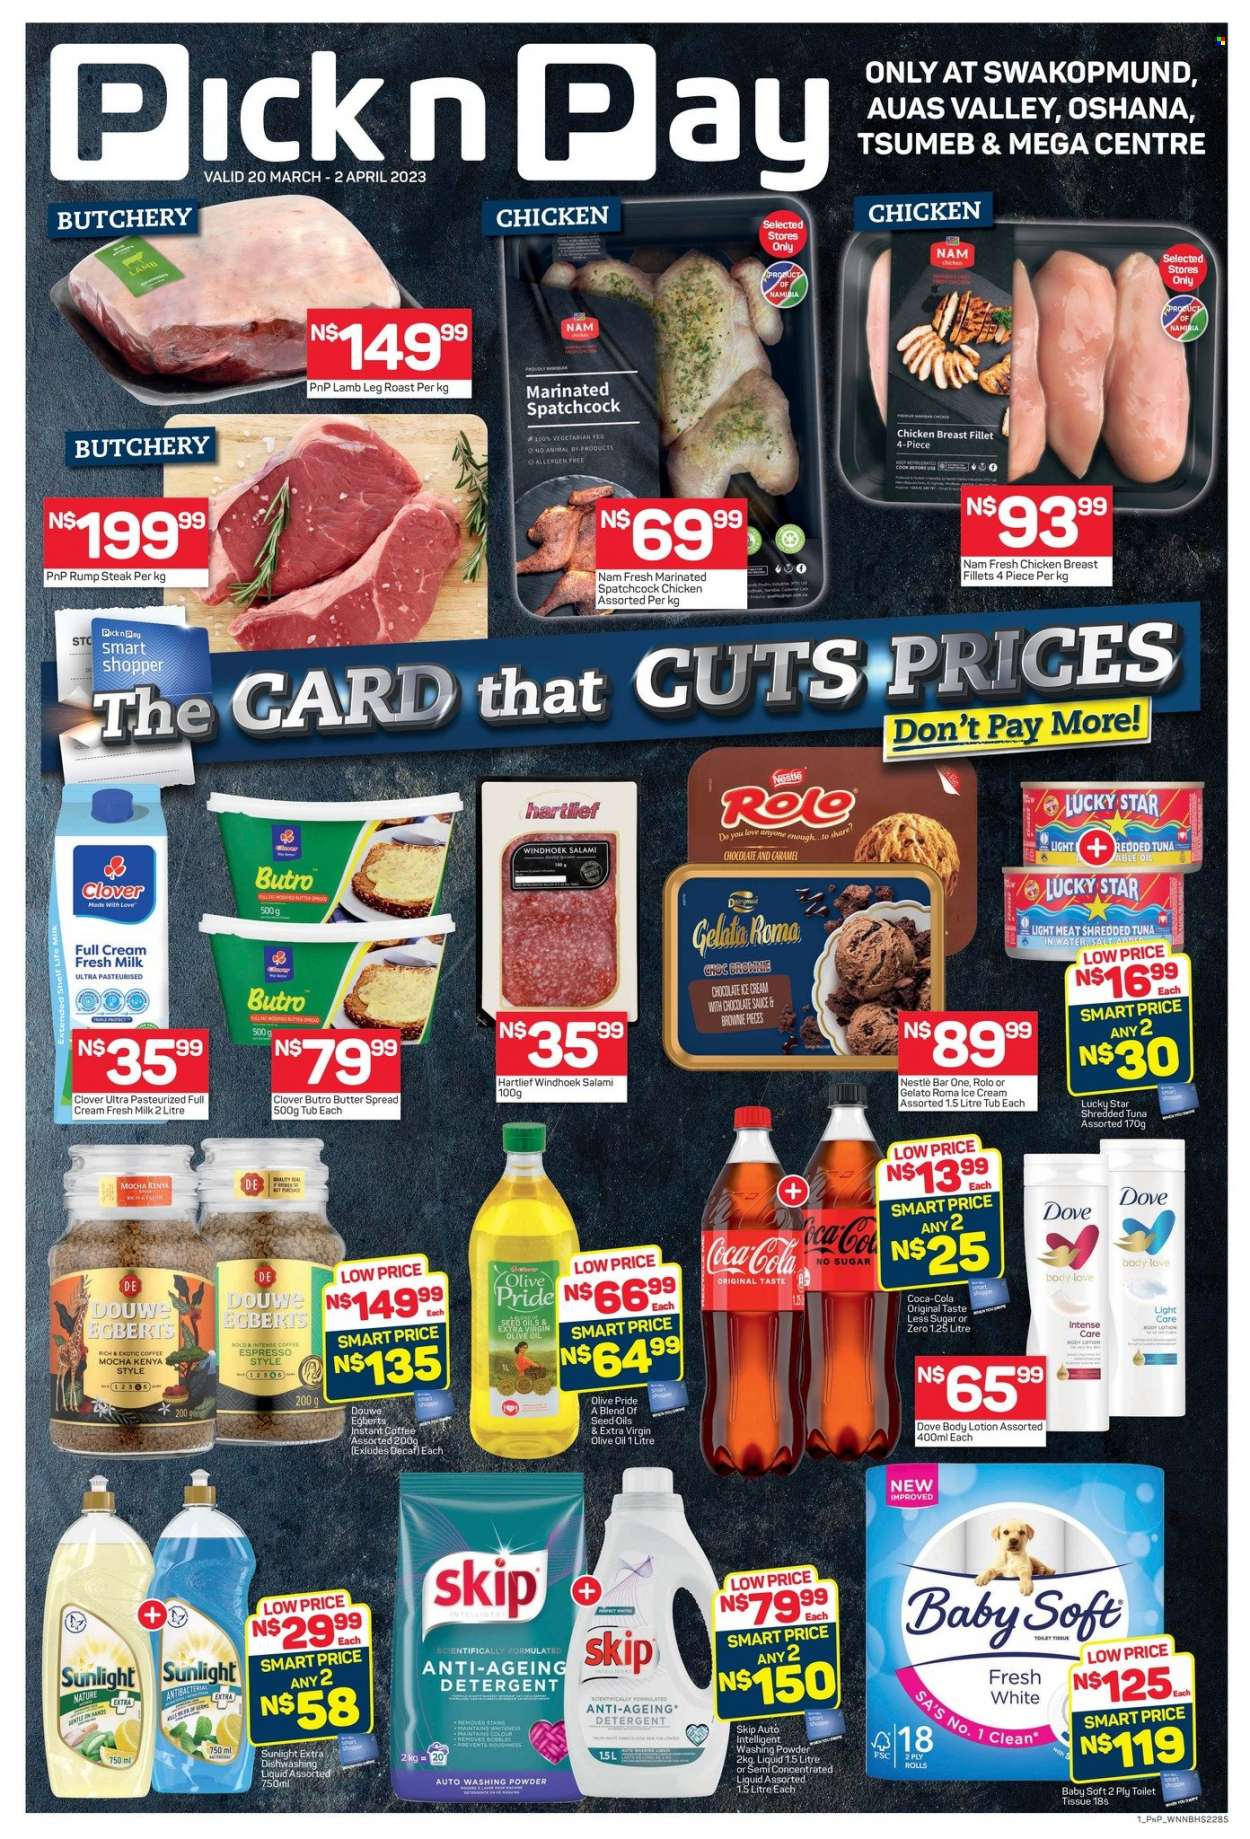 thumbnail - Pick n Pay catalogue  - 20/03/2023 - 02/04/2023 - Sales products - brownies, tuna, roast, salami, Clover, milk, ice cream, gelato, Dove, Nestlé, tuna in water, extra virgin olive oil, olive oil, oil, Coca-Cola, water, coffee, instant coffee, Douwe Egberts, gin, chicken breasts, spatchcock chicken, chicken, beef meat, steak, rump steak, lamb meat, lamb leg, Baby Soft, detergent, laundry powder, Sunlight, dishwashing liquid, body lotion. Page 1.